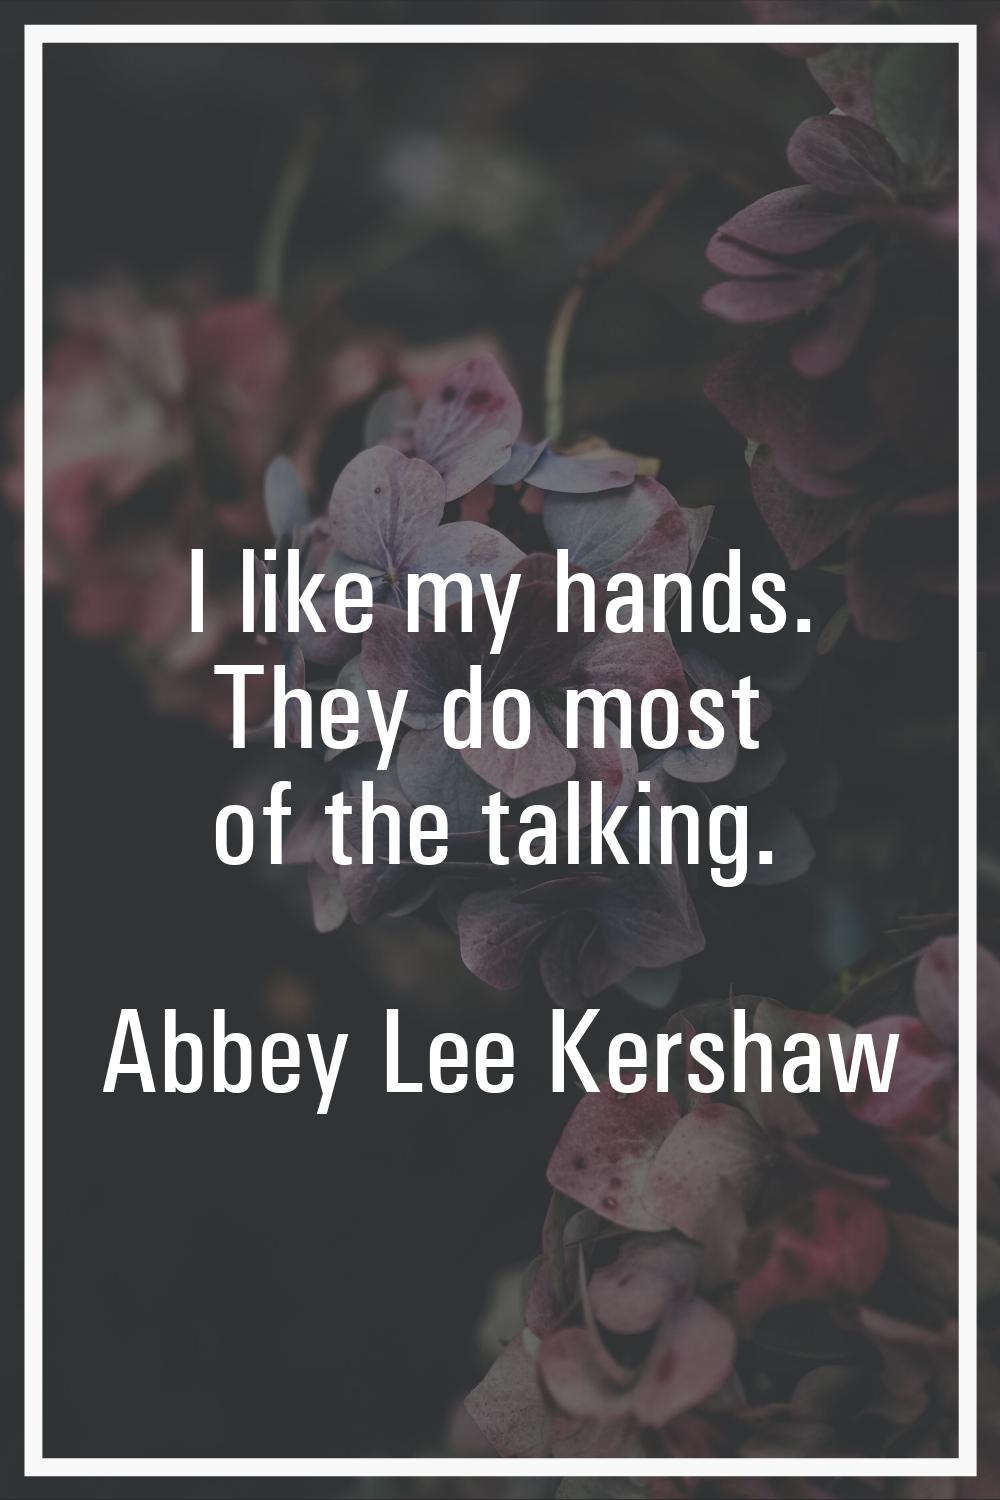 I like my hands. They do most of the talking.